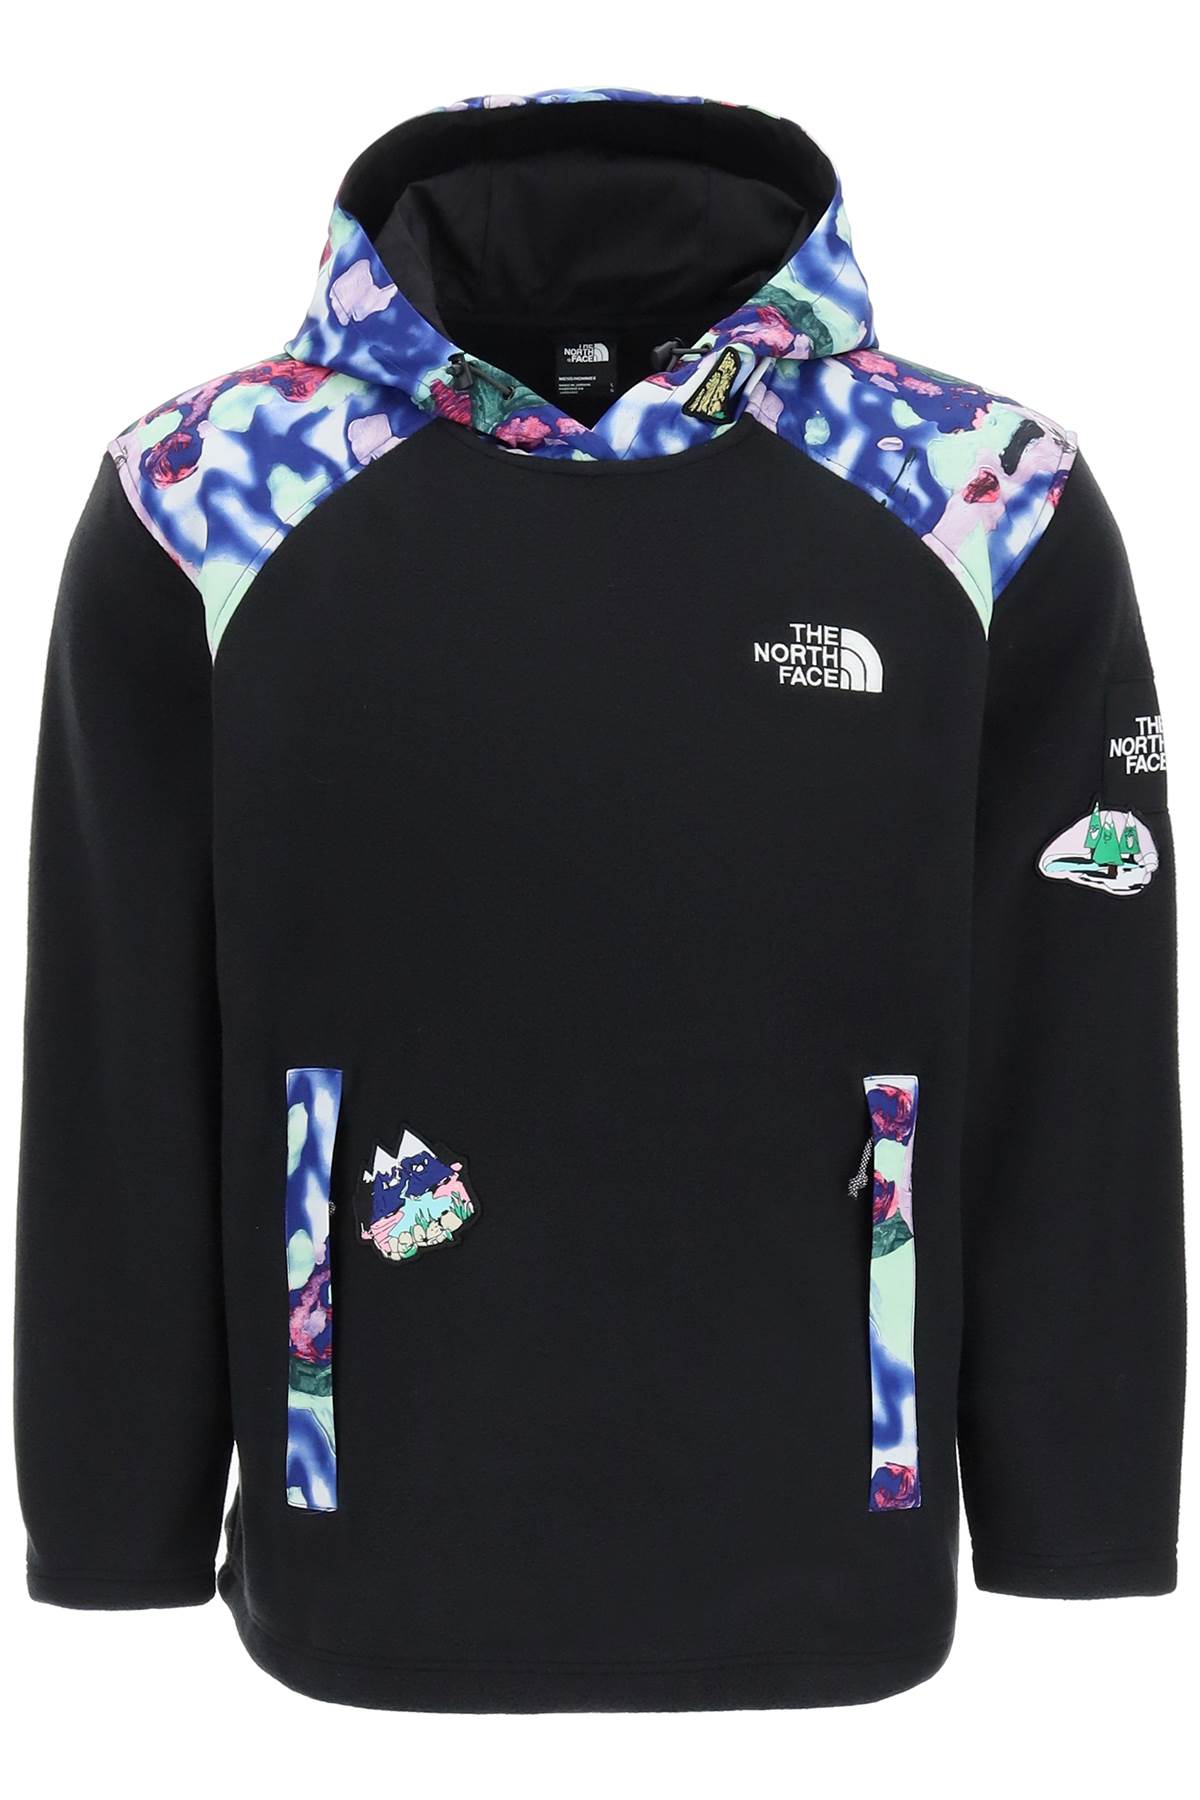 The North Face convin Microfleece Hoodie With Patterned Inserts